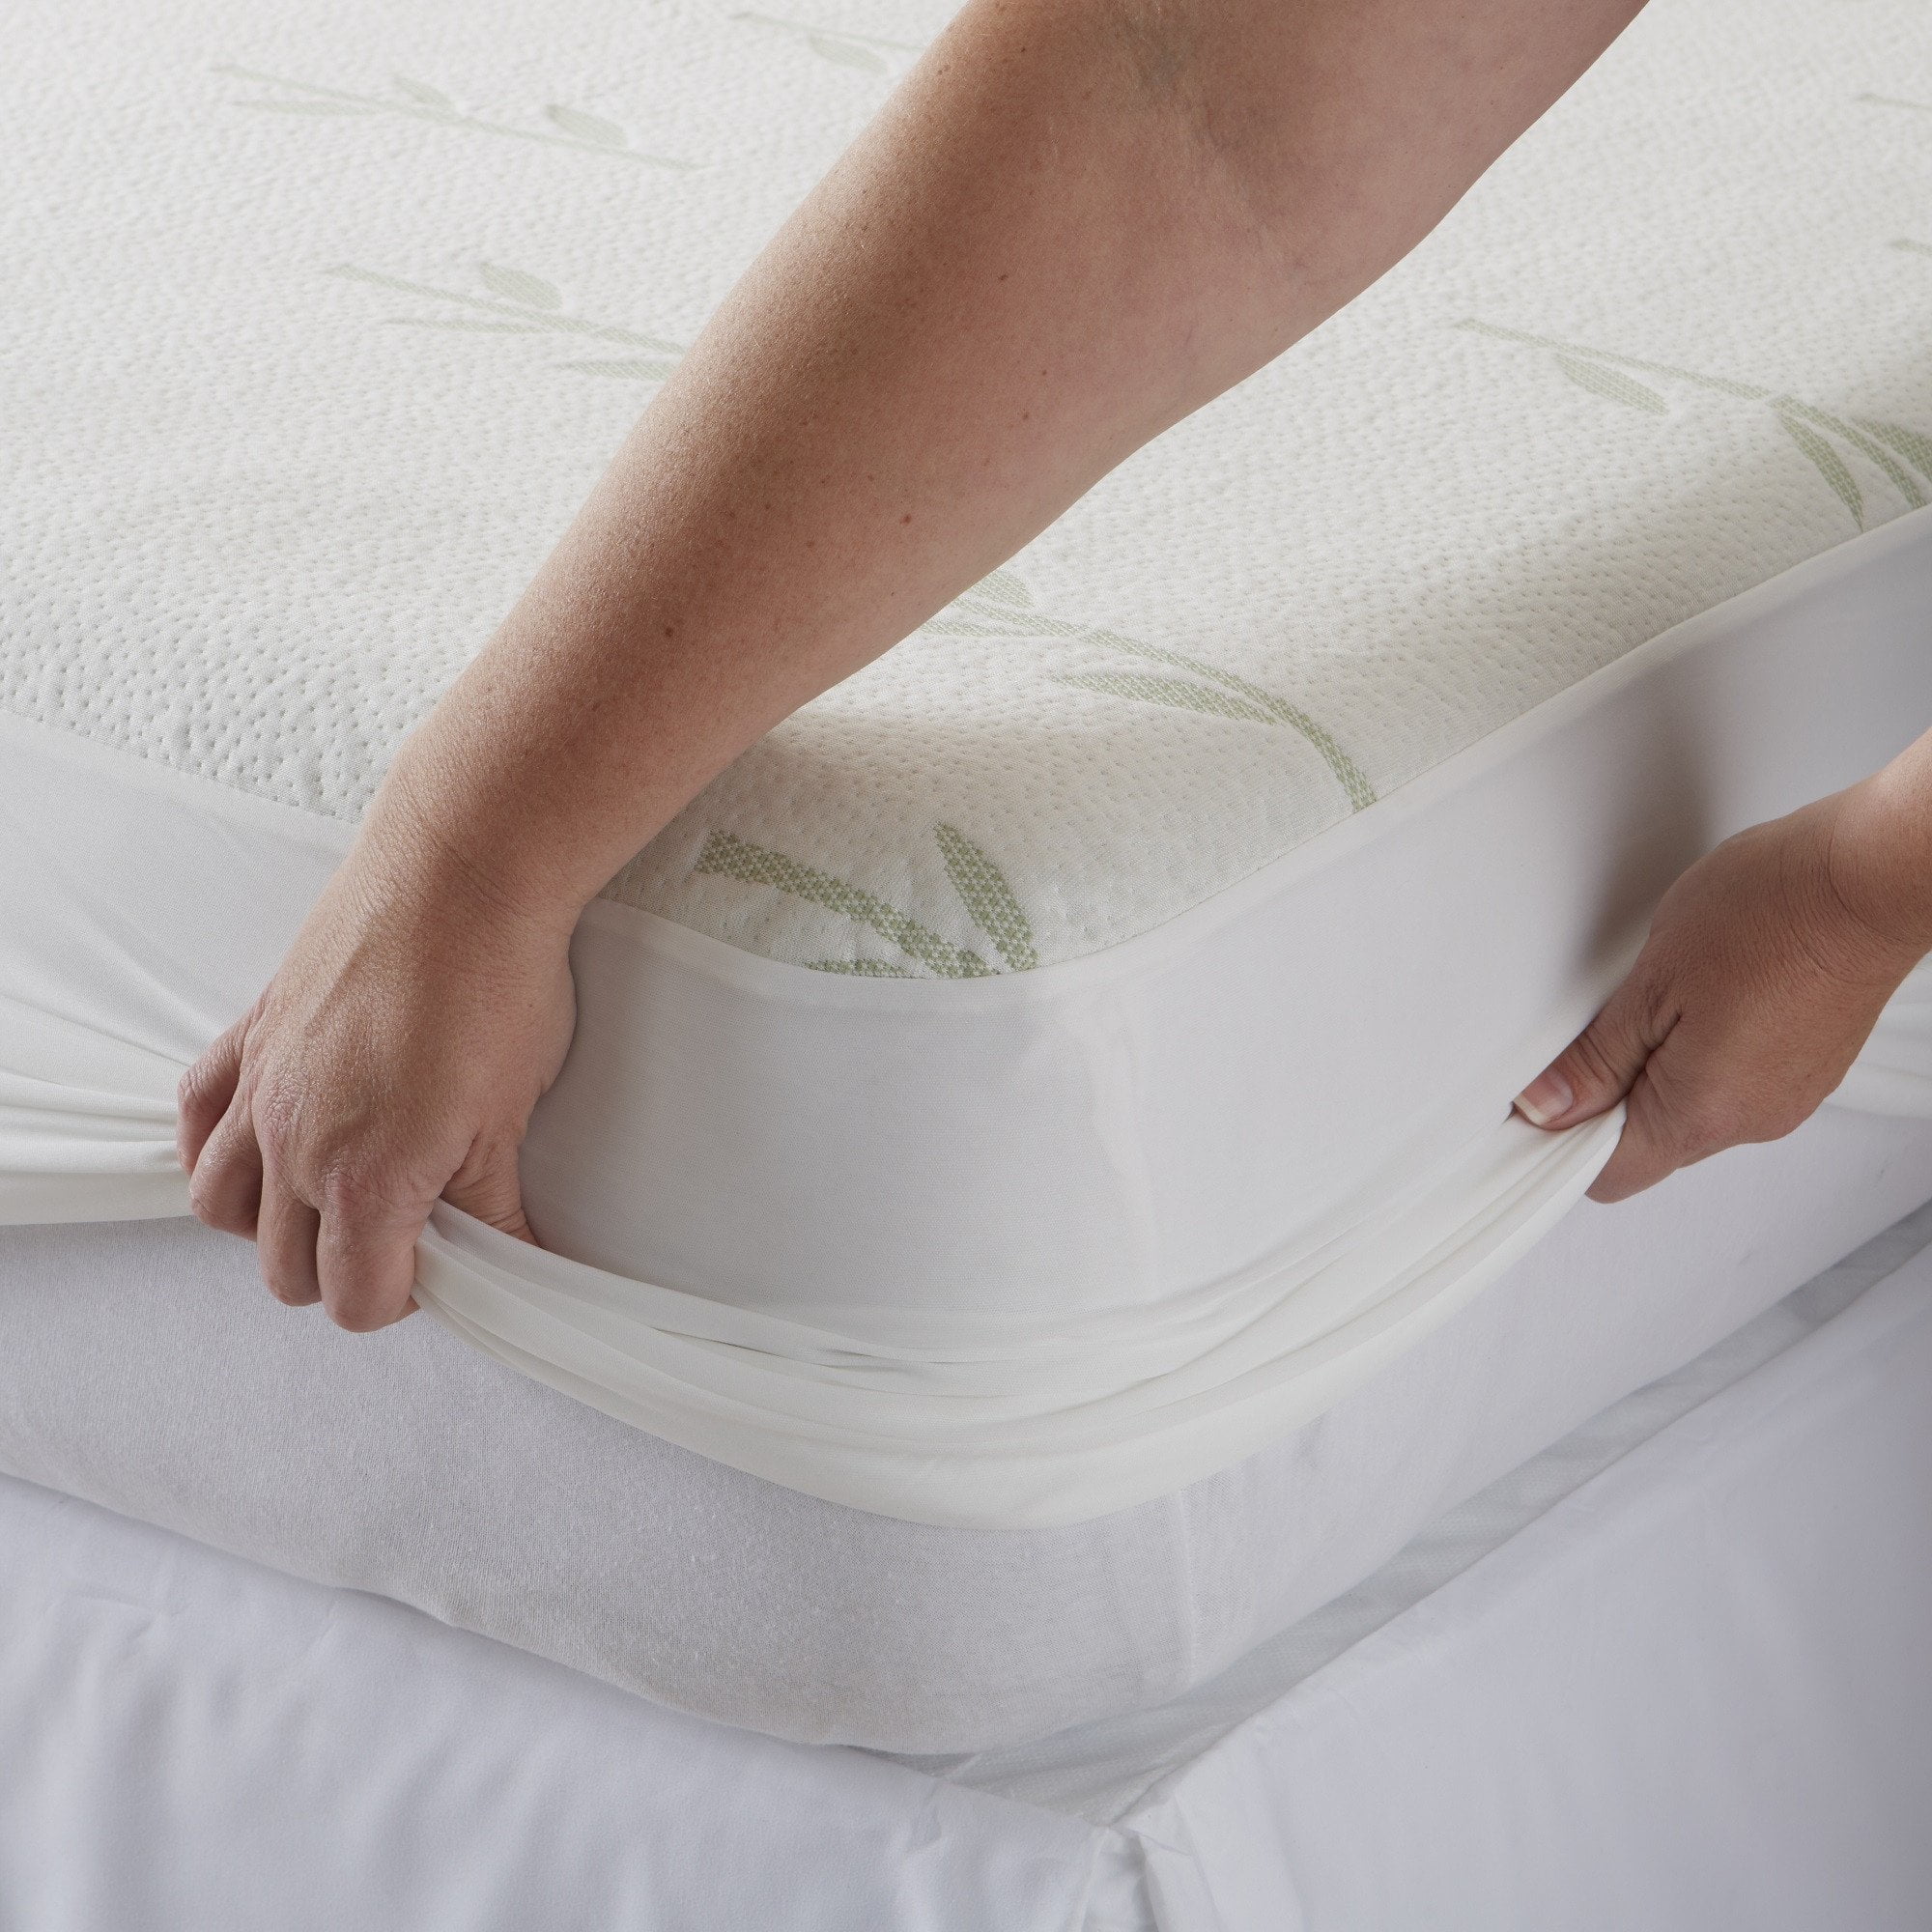 BAMBOO MATTRESS PROTECTOR Waterproof Soft Hypoallergenic Fitted Cover Pad Sizes 